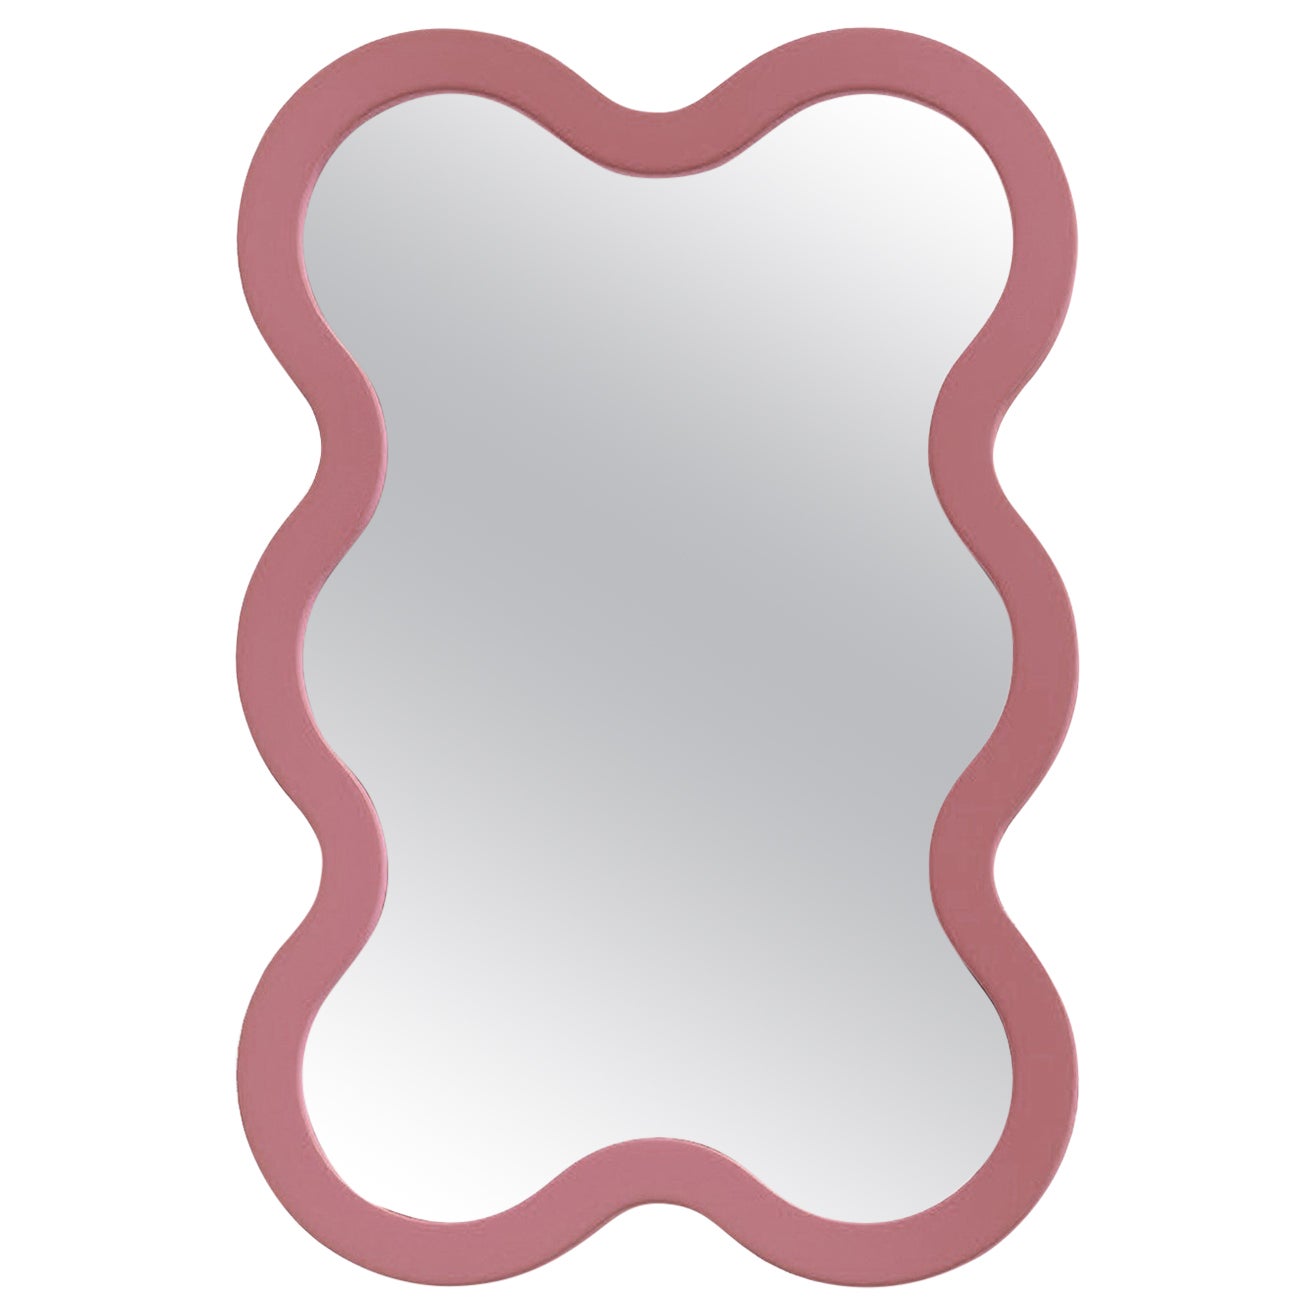 Contemporary Wall Mirror 'Hvyli 6' by Oitoproducts, Pink Frame